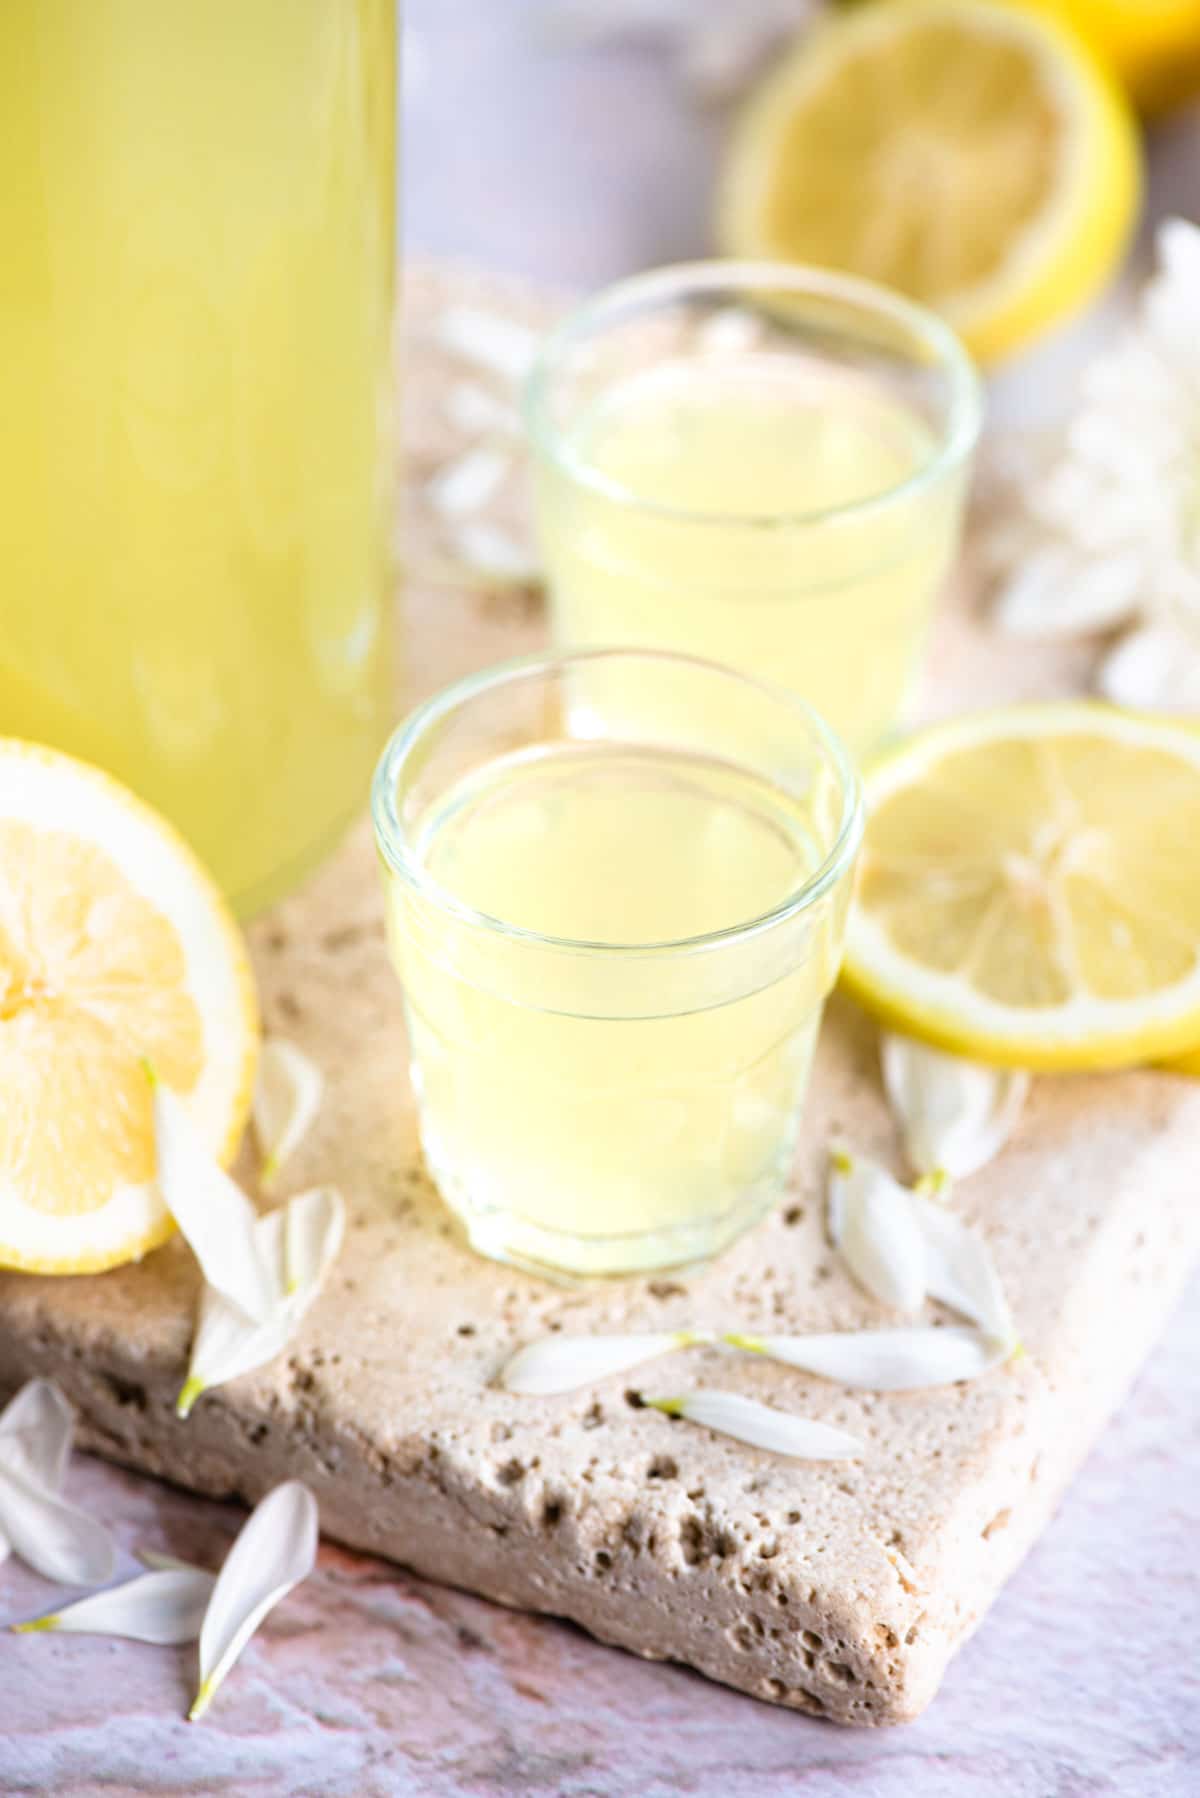 Two shot glasses filled with limoncello with slices of lemon at the side